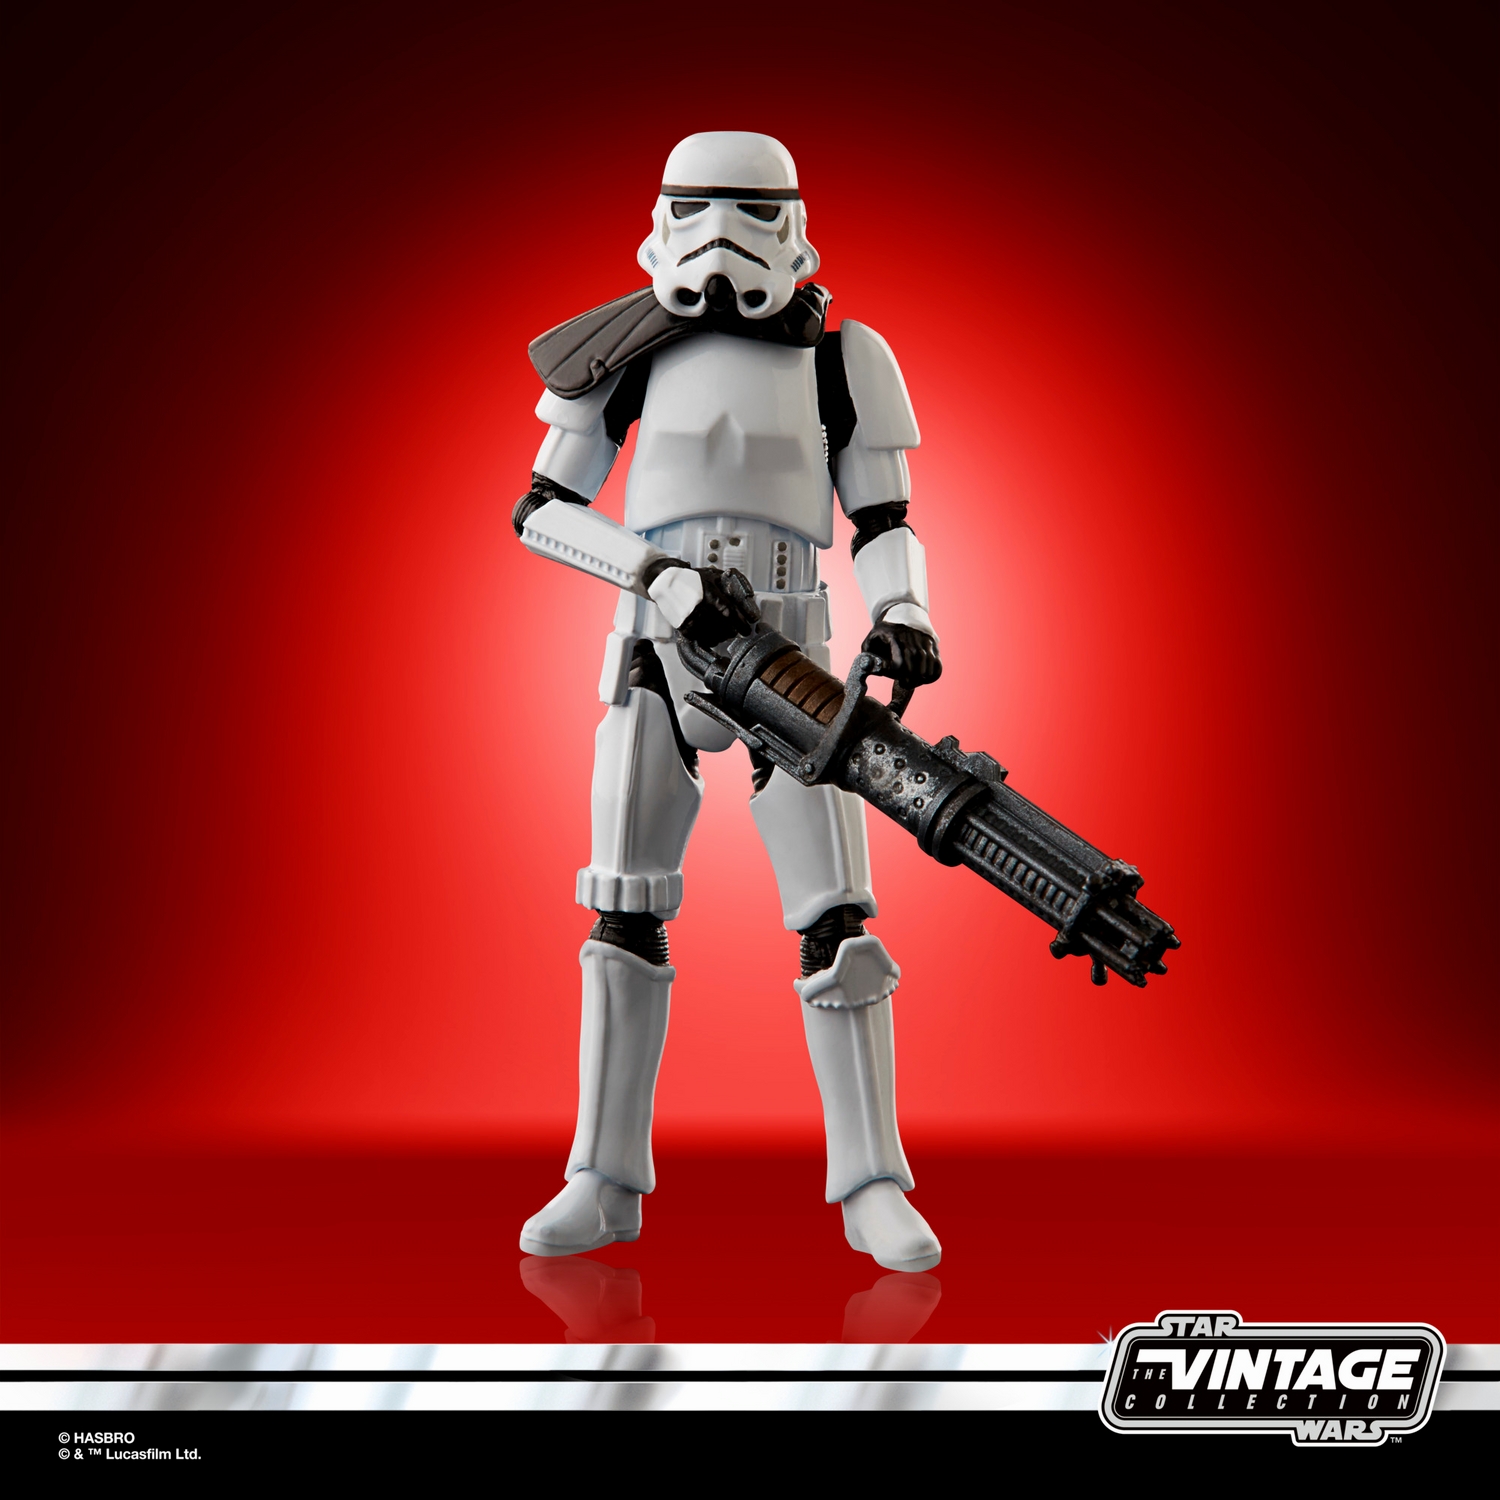 STAR WARS THE VINTAGE COLLECTION 3.75-INCH GAMING GREATS HEAVY ASSAULT STORMTROOPER FIGURE - 2.jpg